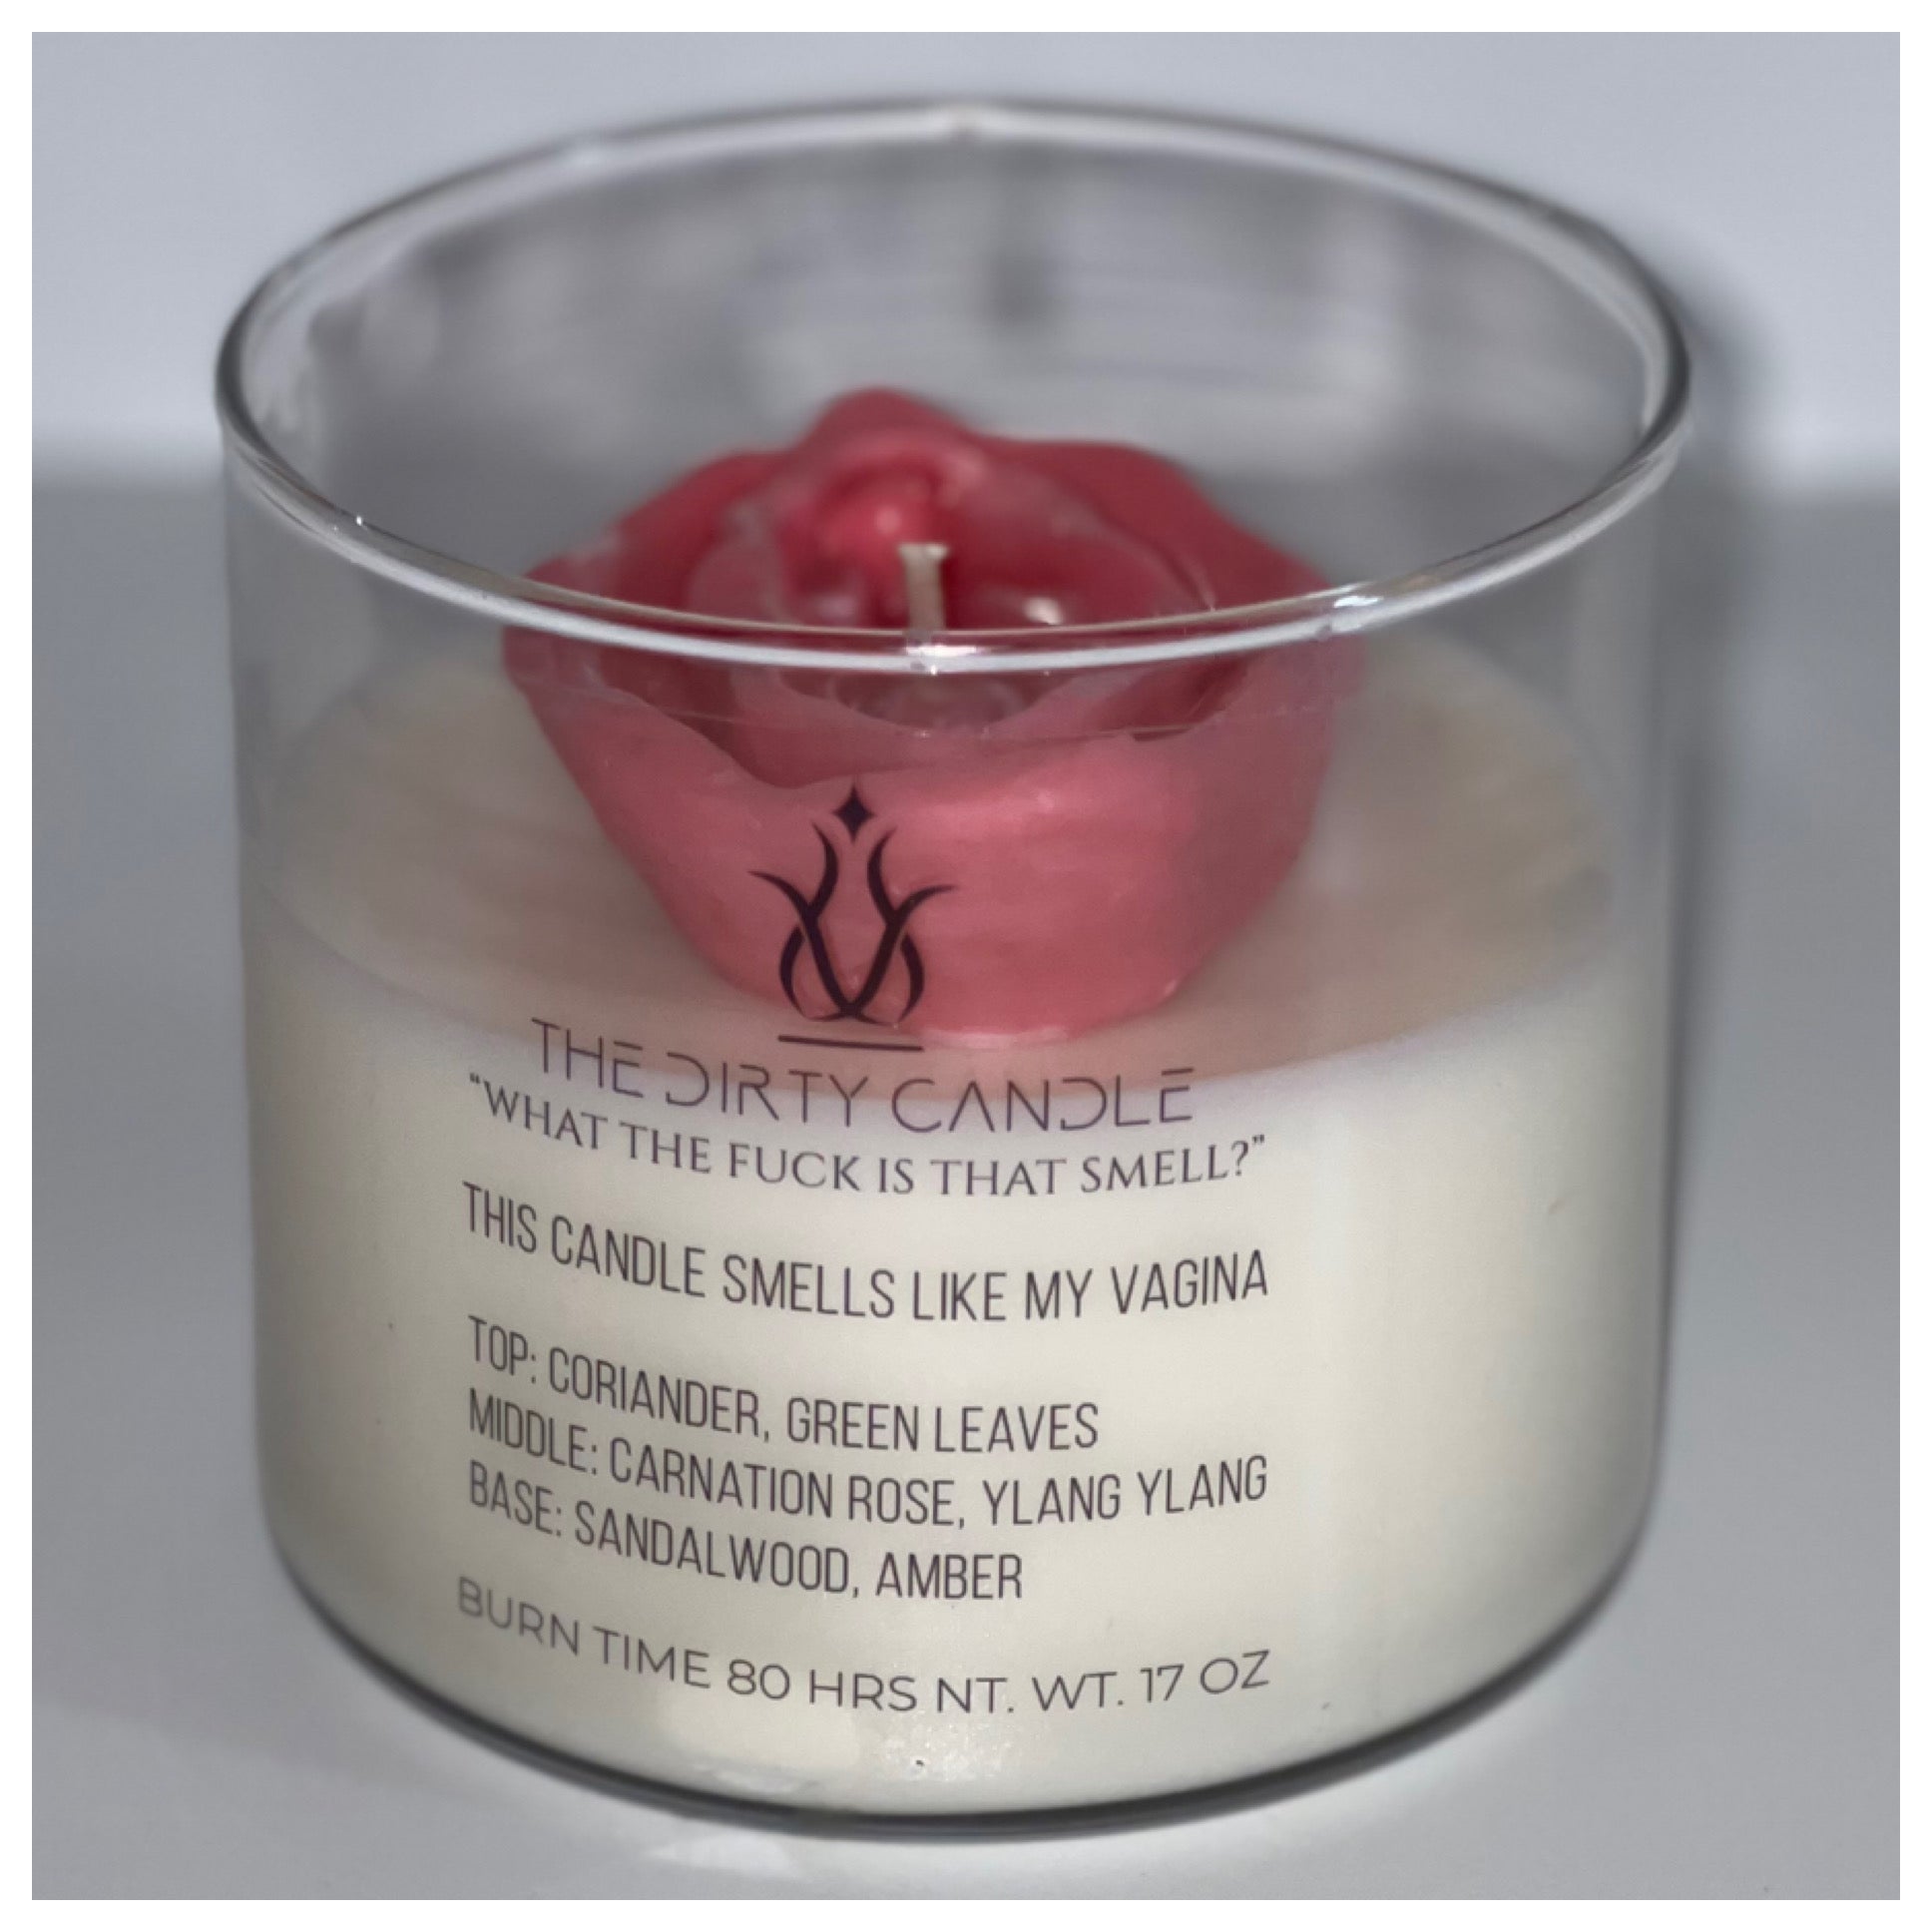 THIS CANDLE SMELL LIKE MY VAGINA